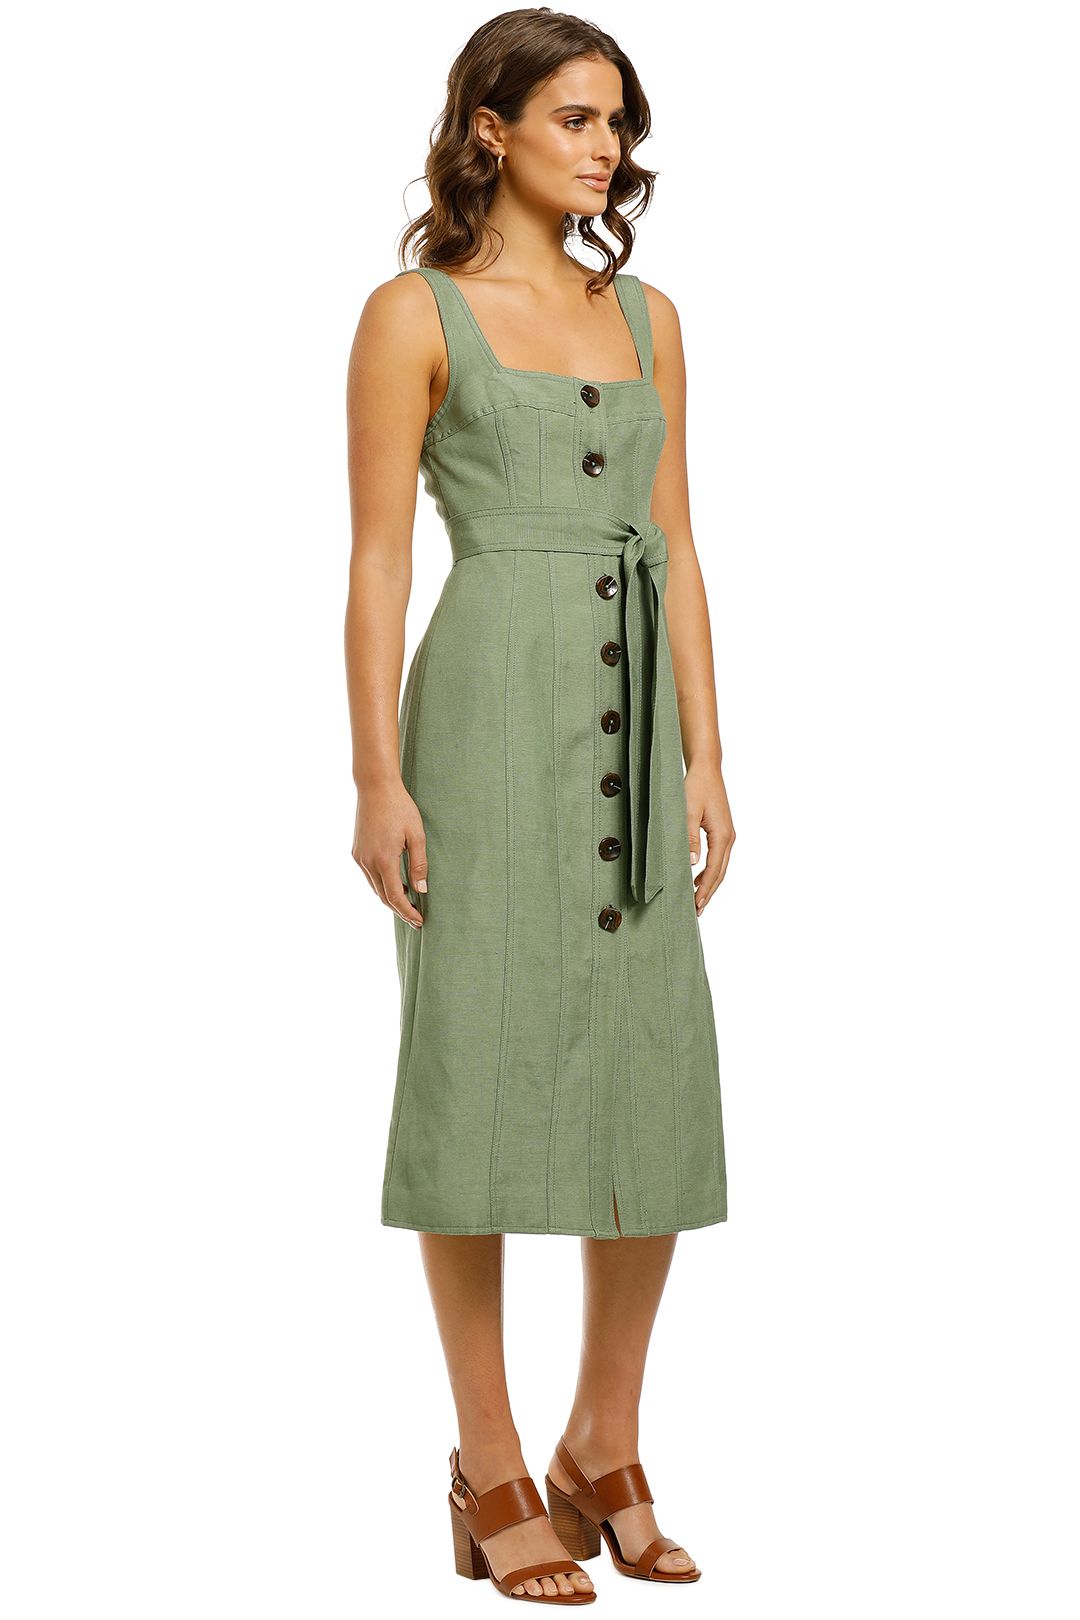 CMEO-Collective-Occurence-Dress-Ivy-Side